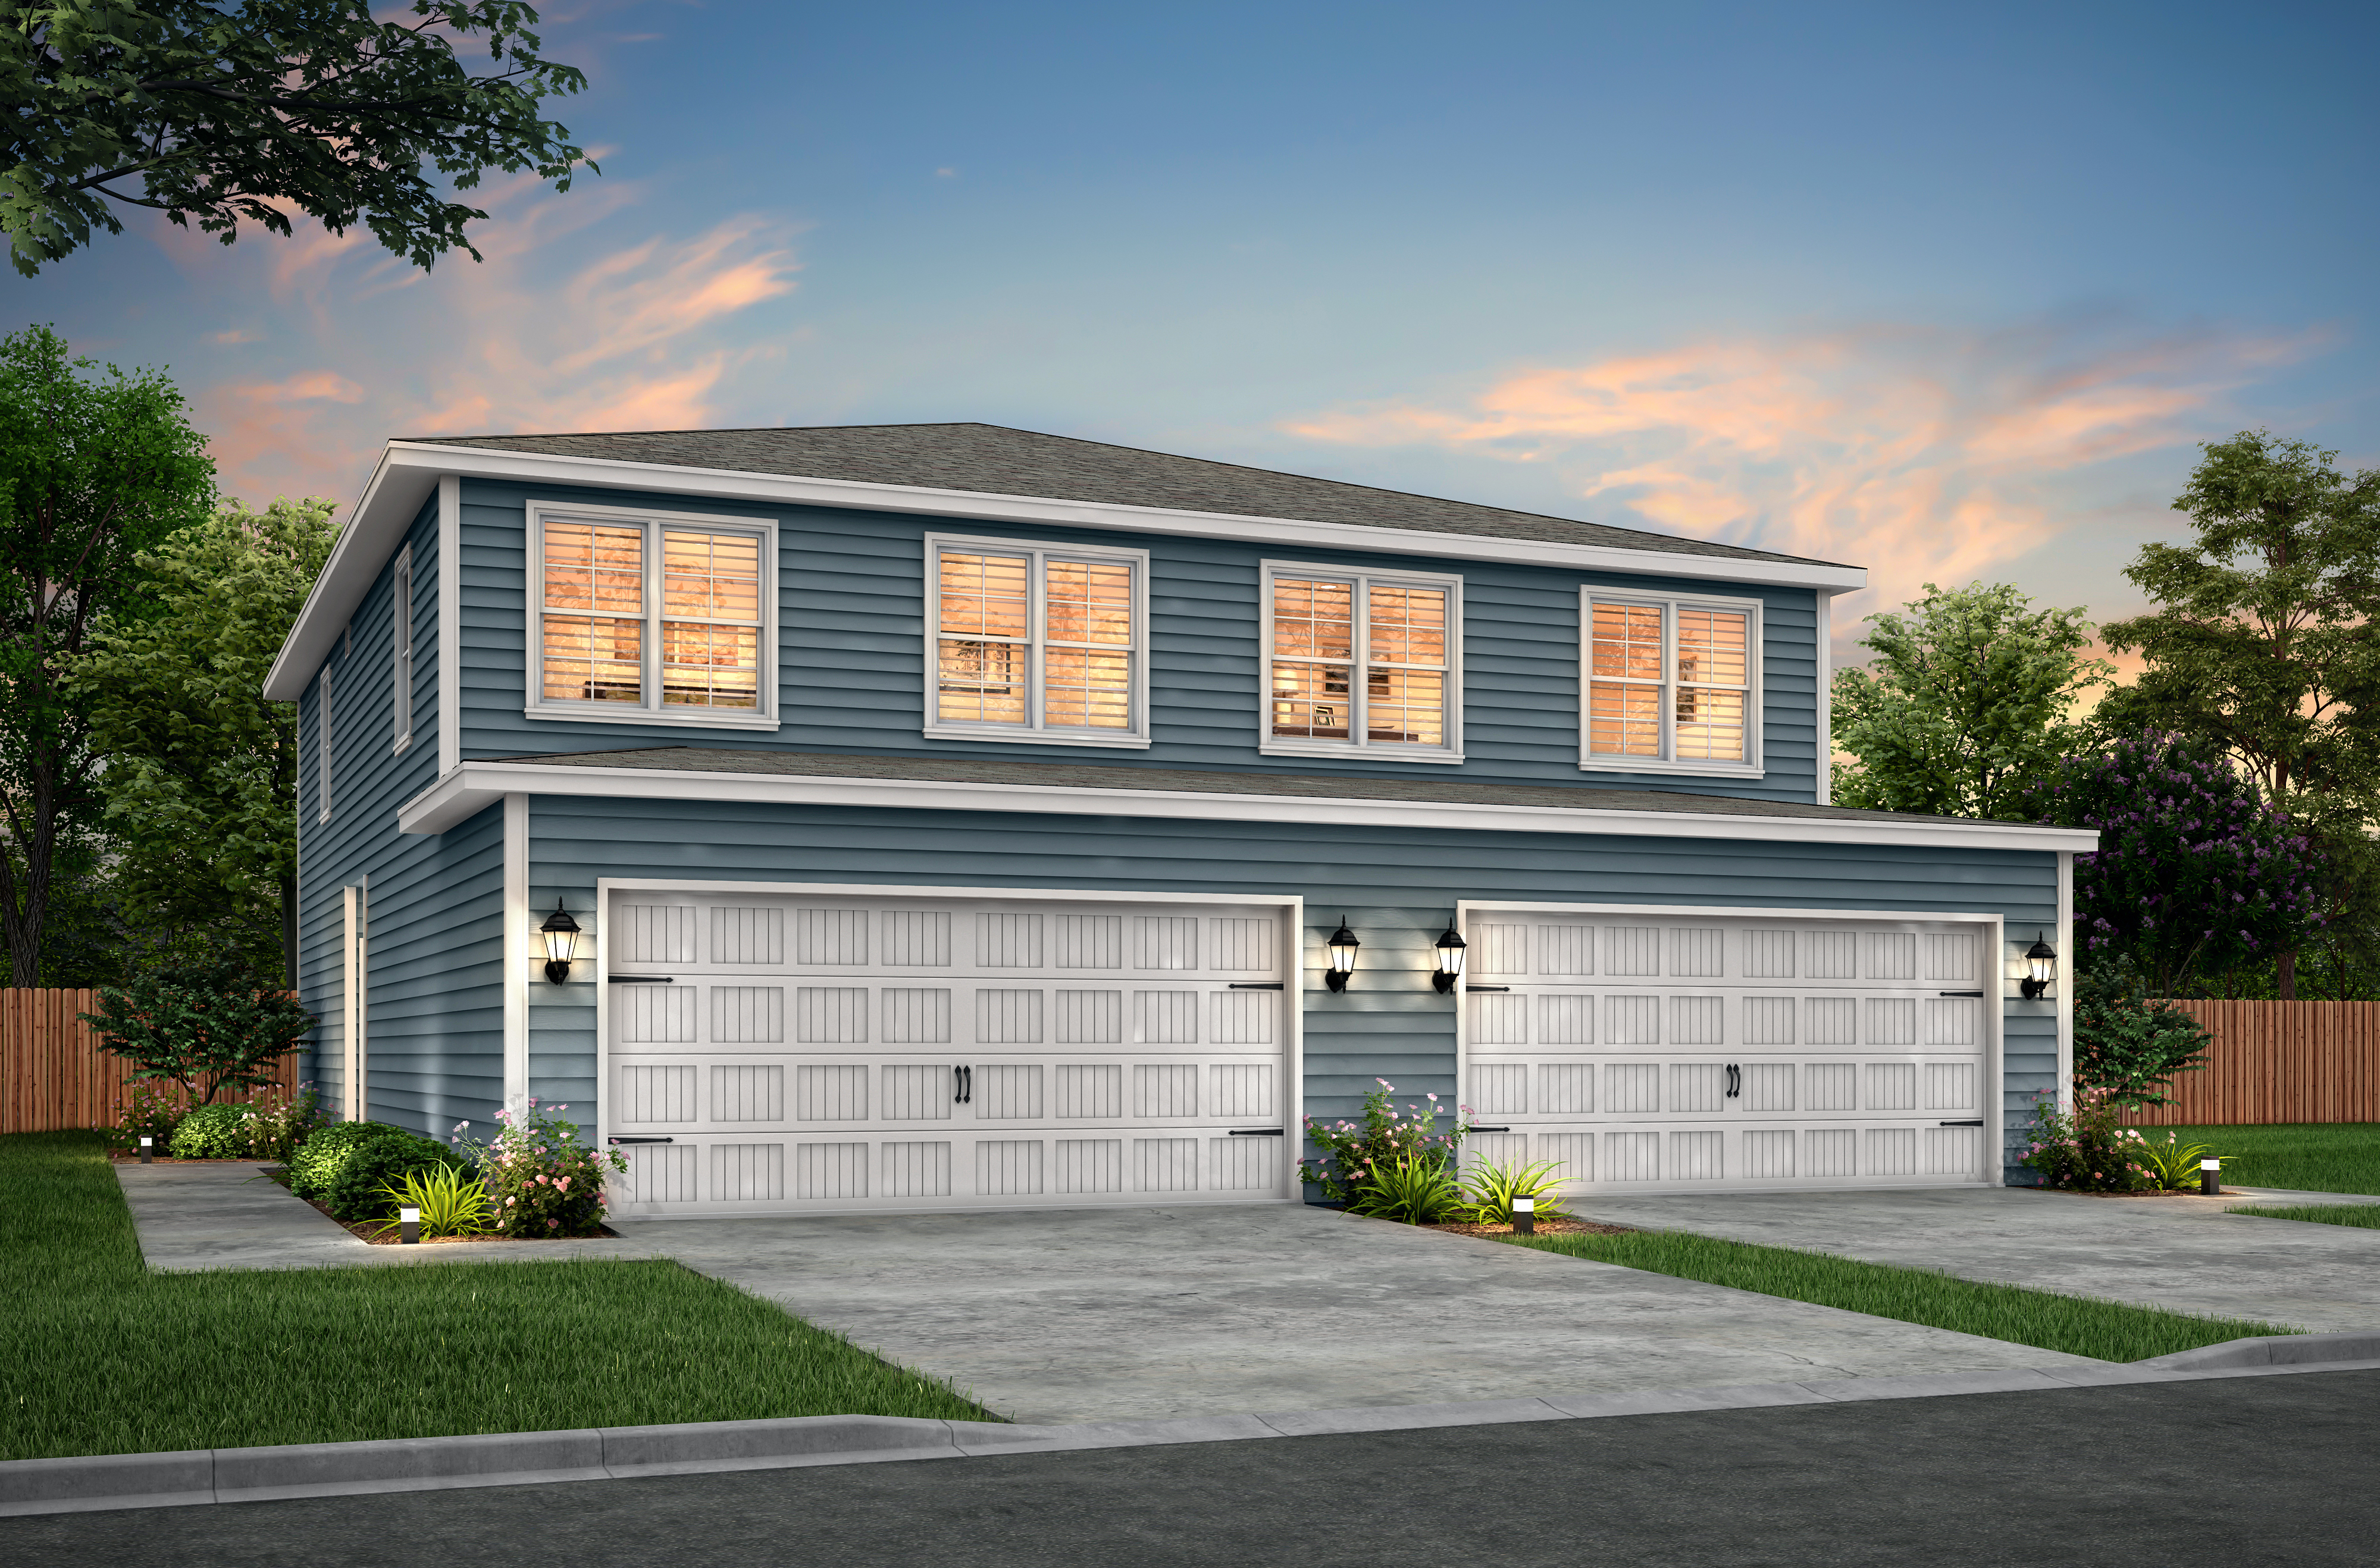 The Juniper plan is a brand-new, three-bedroom townhome by LGI Homes.